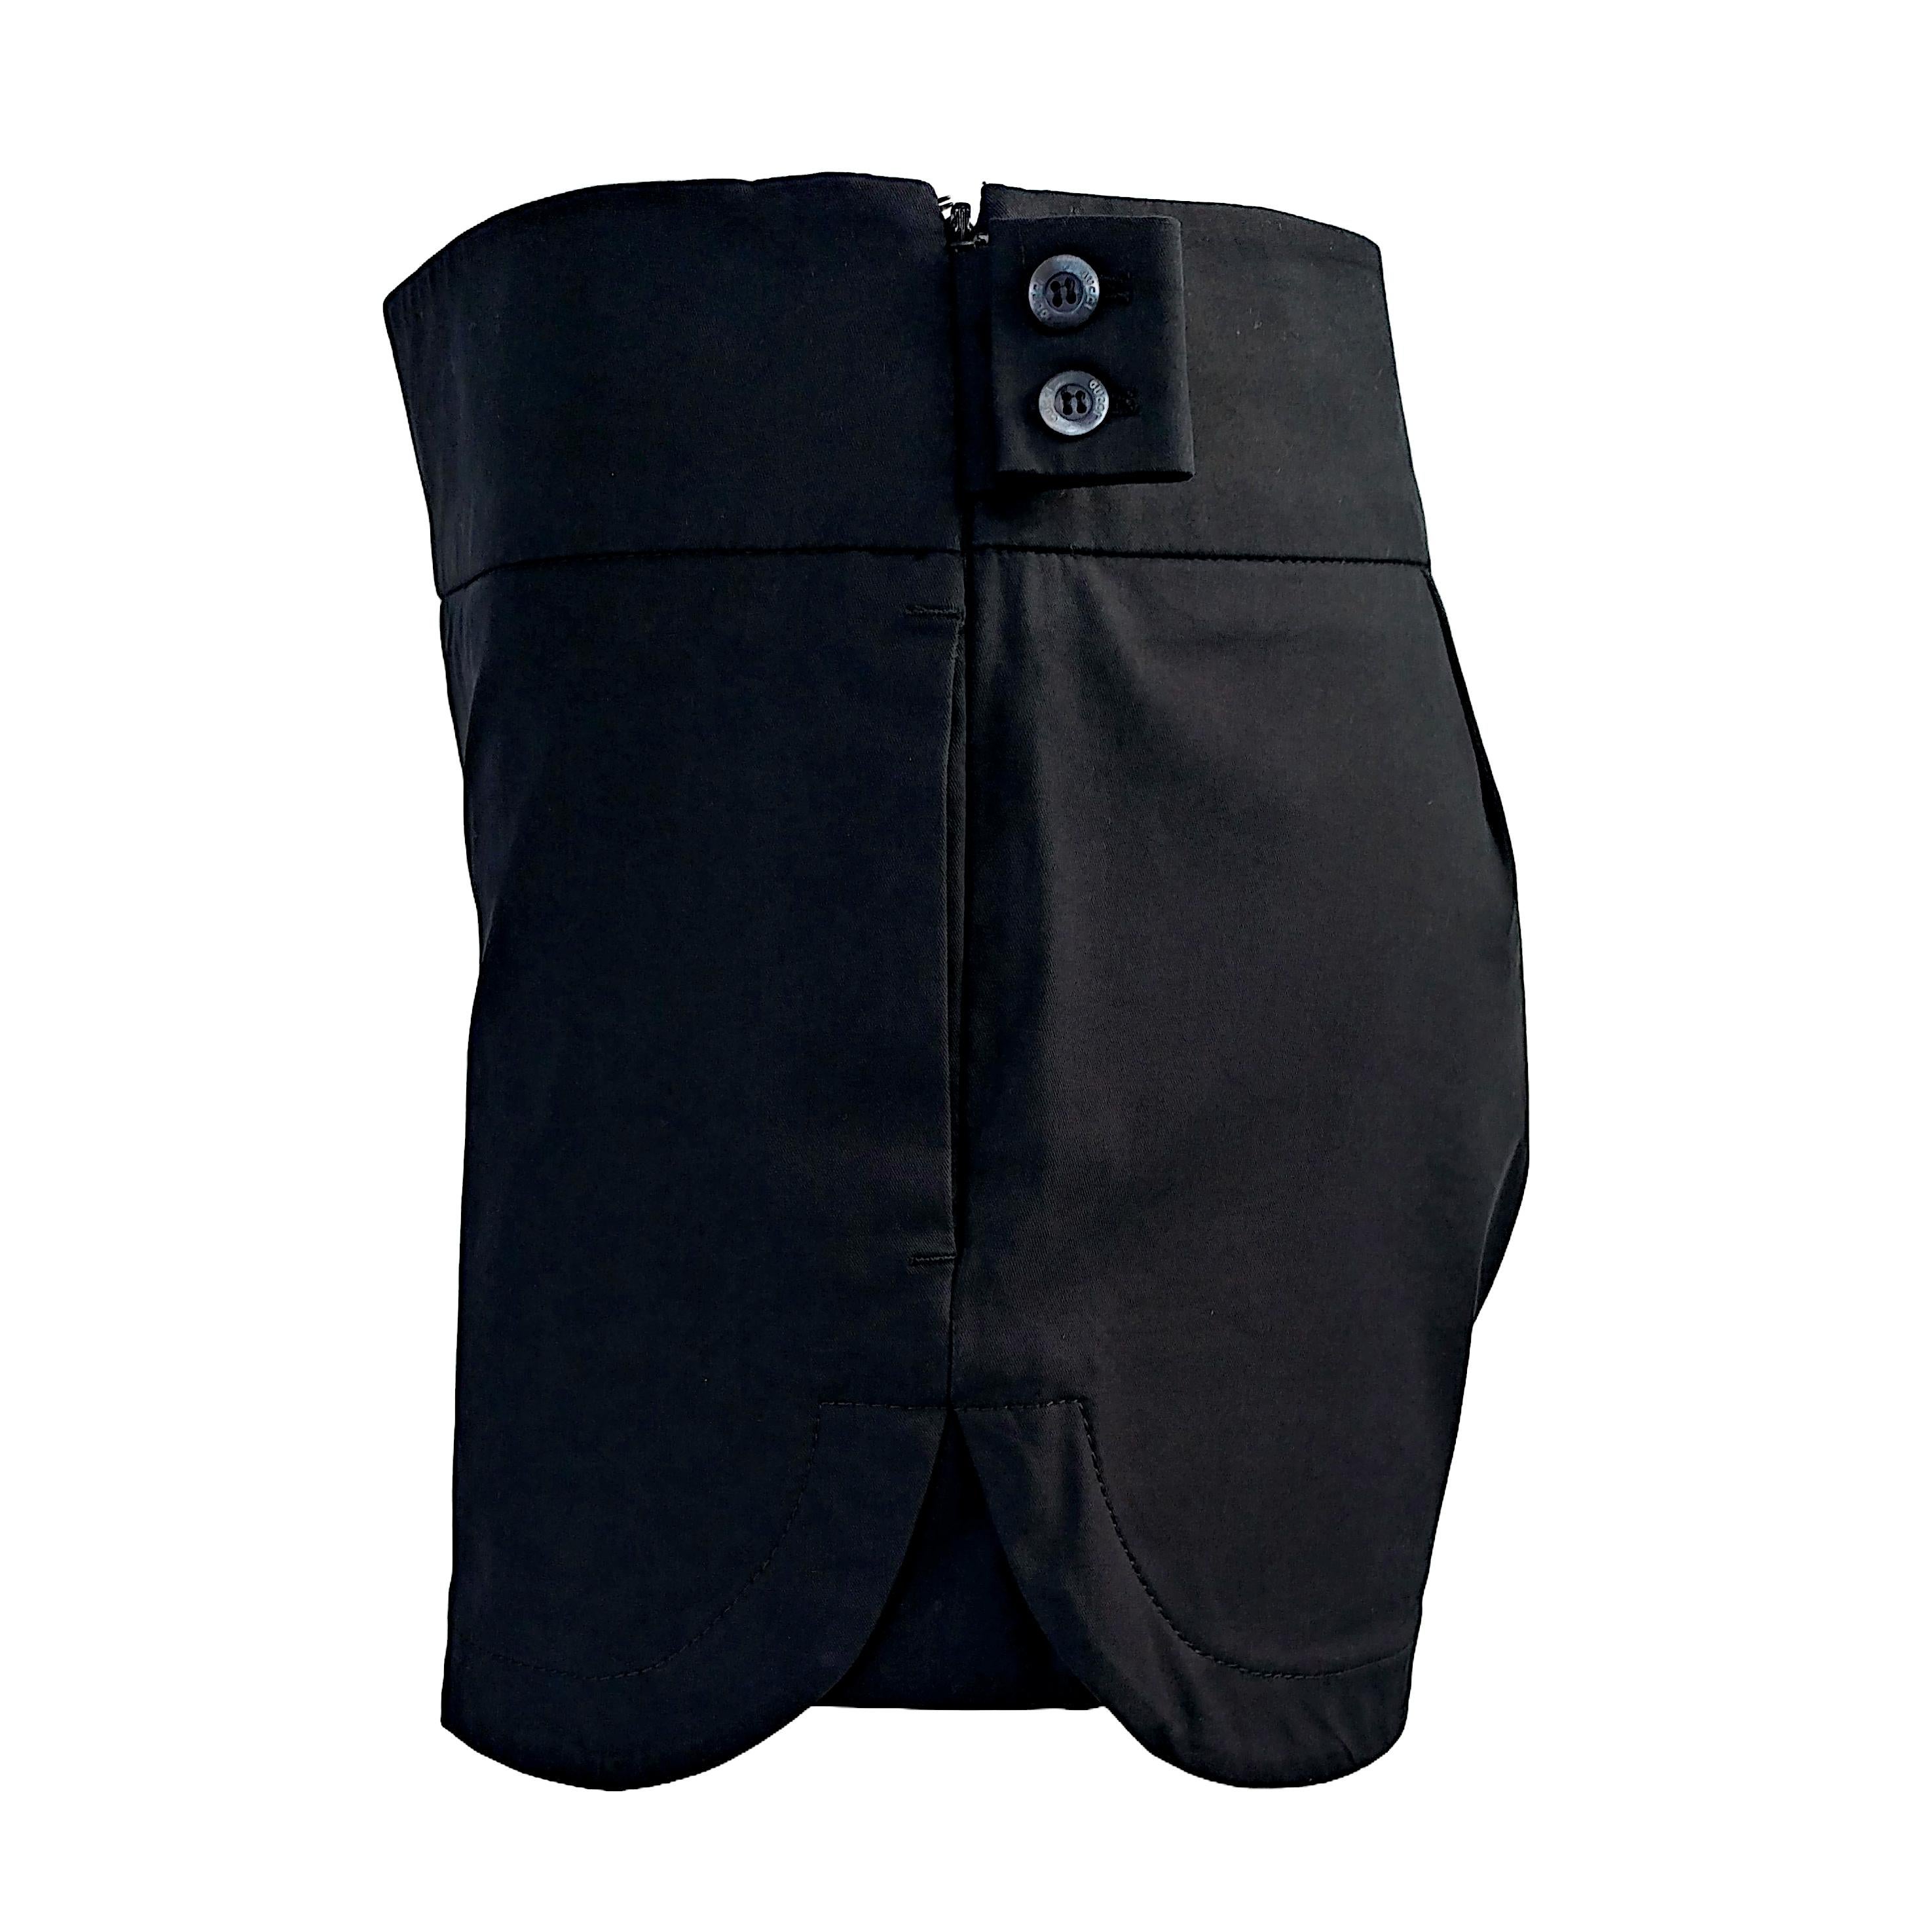 Introducing these Gucci black cotton shorts, a vintage gem with a touch of history. Crafted for both style and functionality, these shorts feature two side pockets, providing practical storage without compromising on design. The left side is adorned